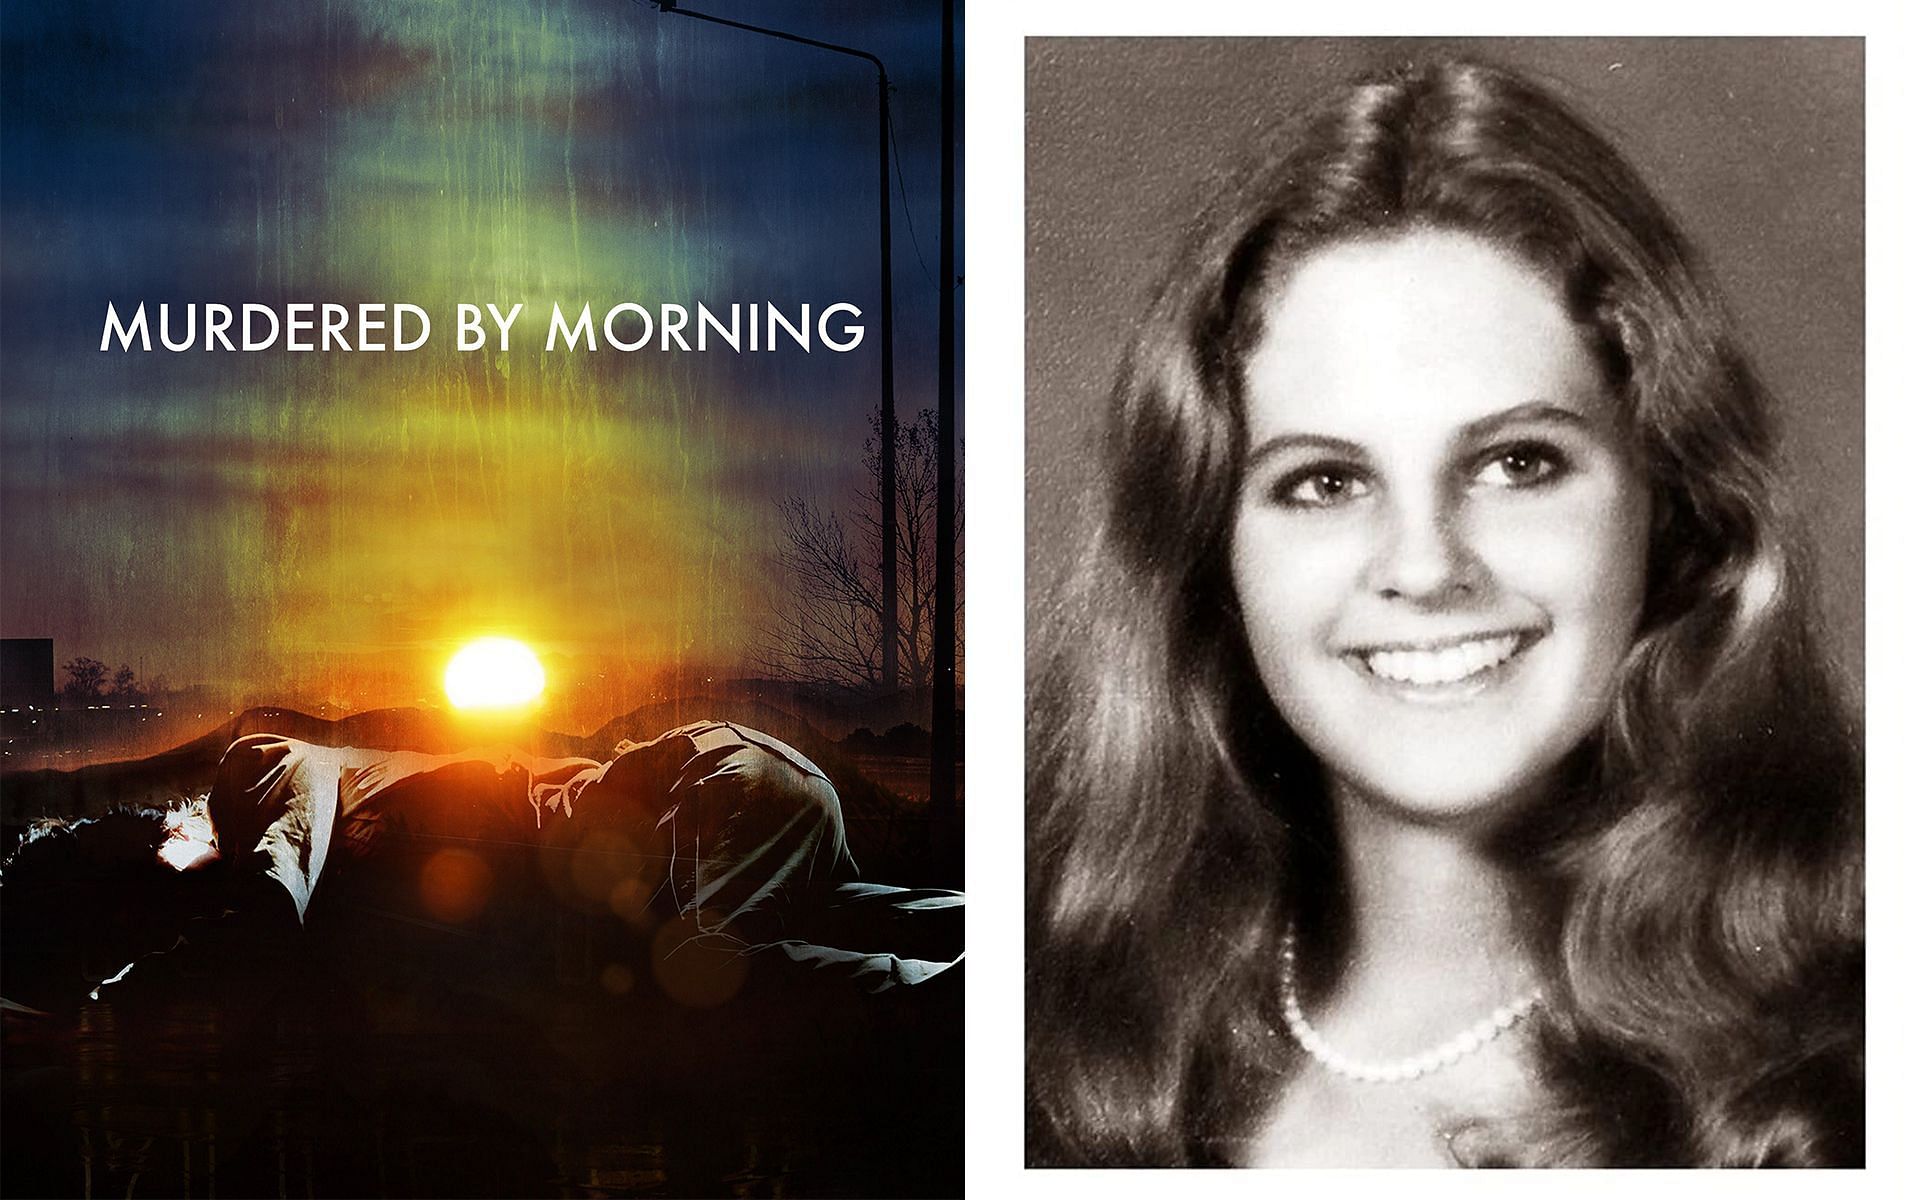 Murdered by Morning explores the gruesome murder and rape of 20-year-old Angela Samota (Images via Rotten Tomatoes and IMDb)